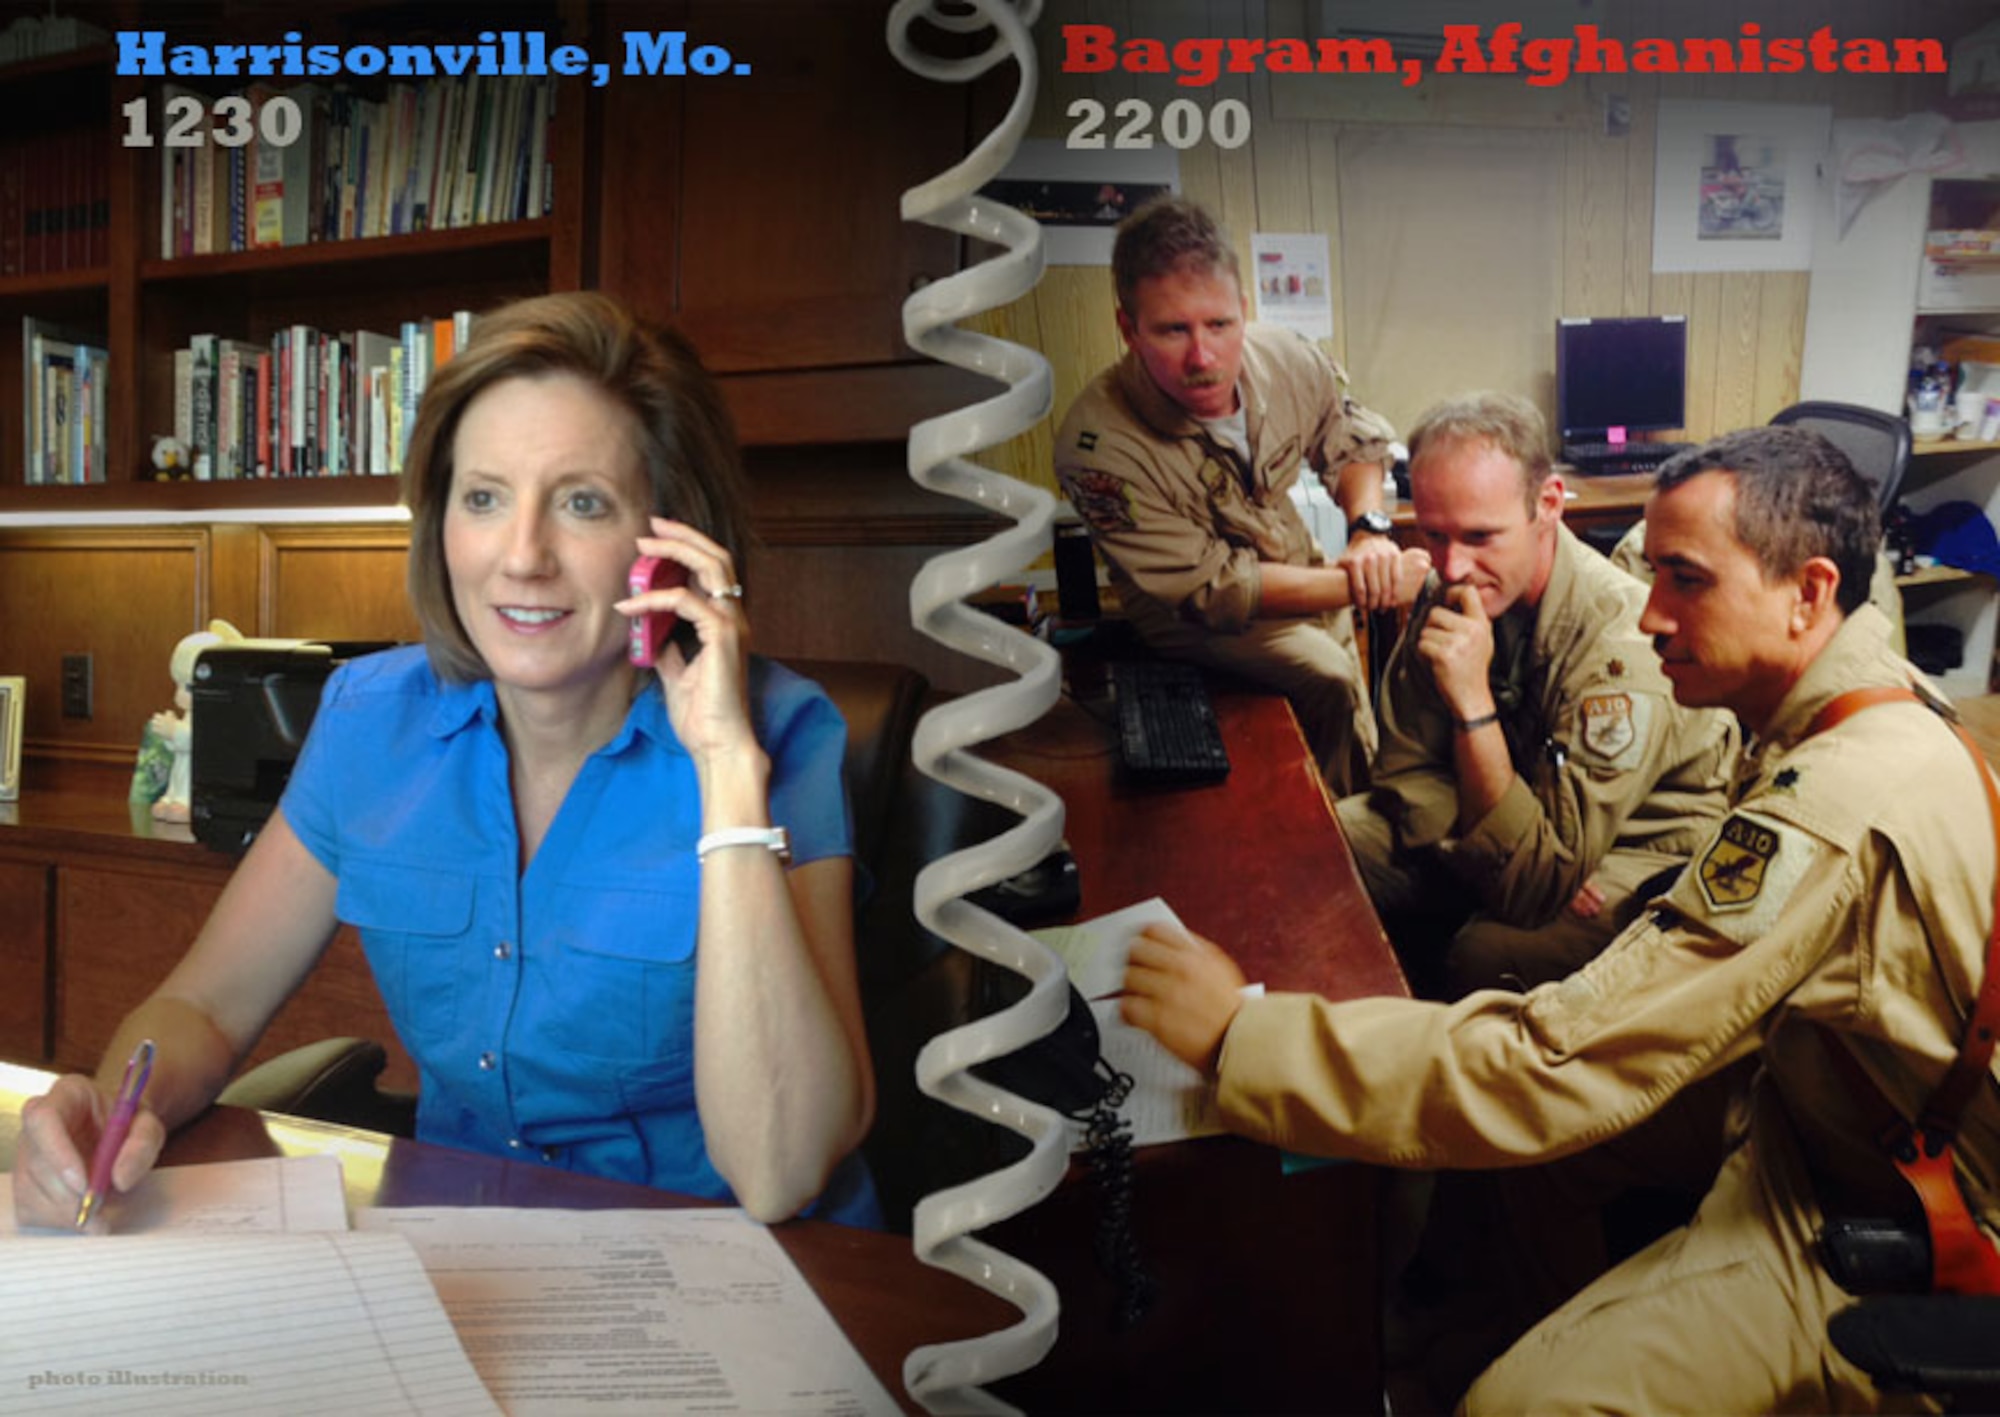 Deployed 442d Fighter Wing reservists received a phone call from Missouri Congresswoman Vicky Hartzler on Monday. Hartzler phoned the deployed citizen airmen from her home office outside Harrisonville, Mo. (U.S. Air Force photo illustration by Technical Sgt. Emilly Alley)